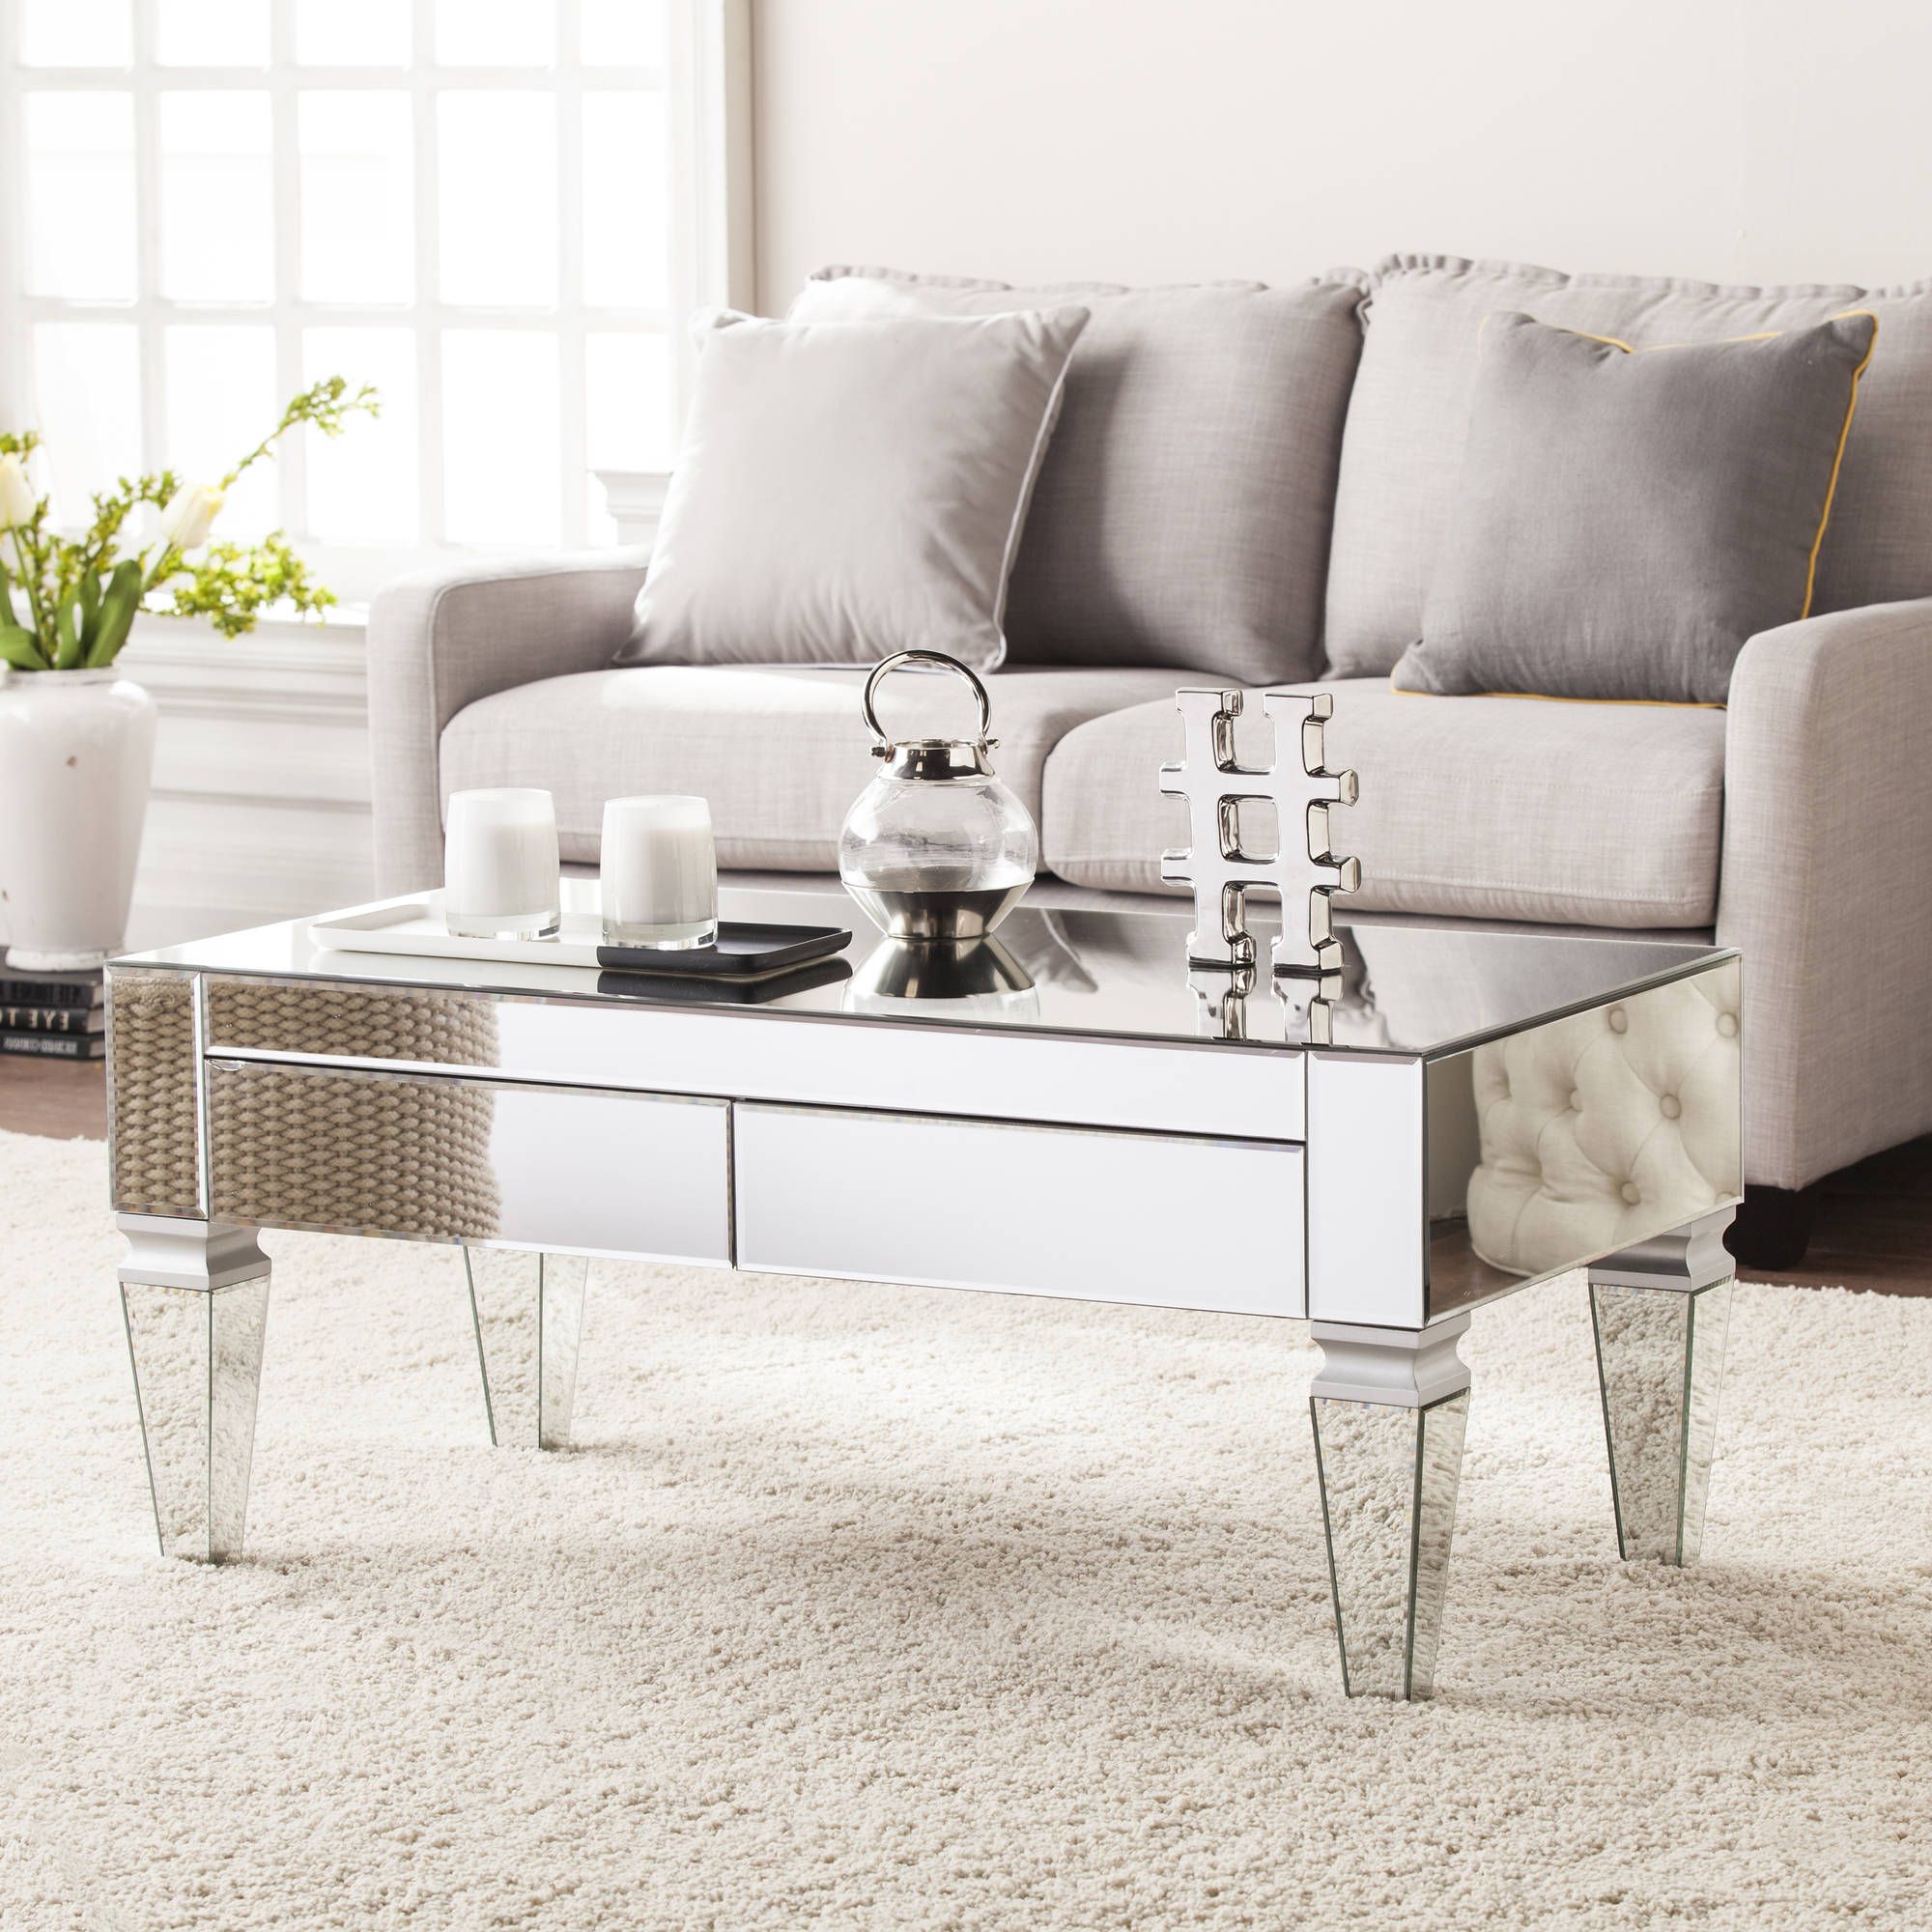 Dustox Mirrored Rectangular Coffee Table, Mirroredember Interiors Regarding 2019 Mirrored Coffee Tables (View 10 of 10)